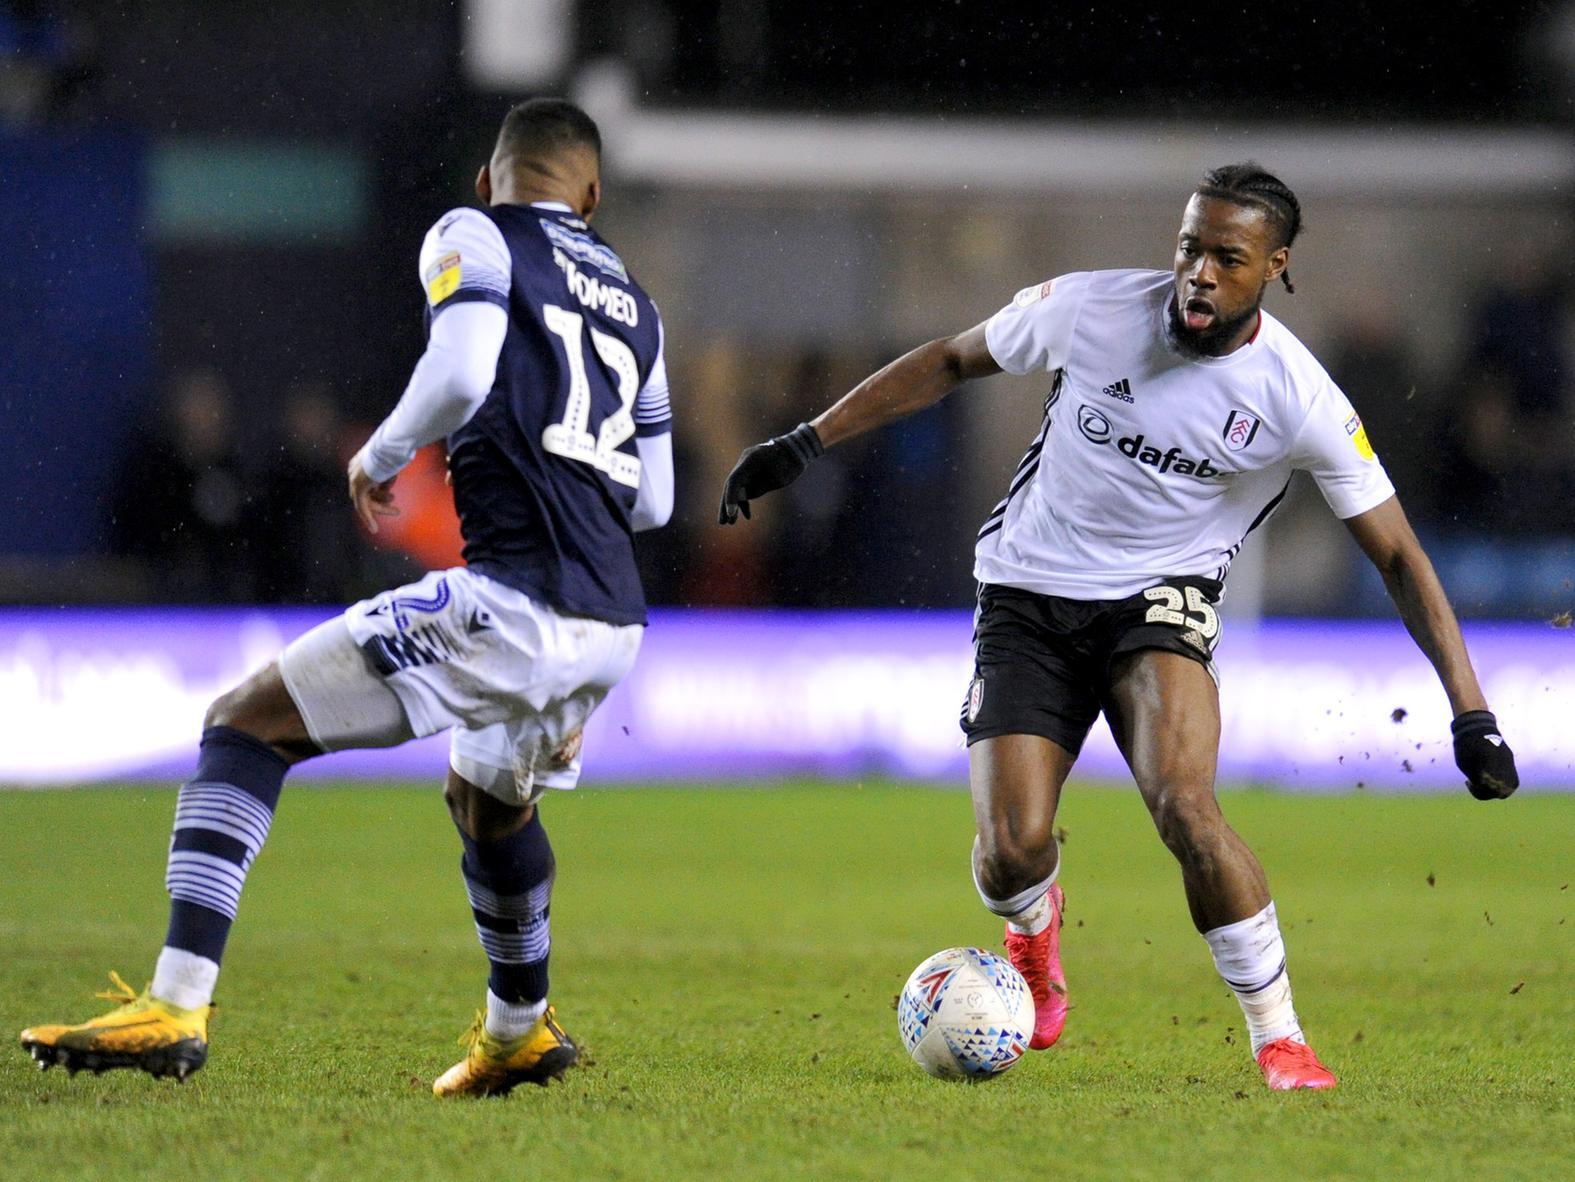 Fulham's hopes of reaching the play-offs have taken a blow, with key midfielder Josh Onomah being ruled out for six weeks after undergoing surgery on a knee injury. (BBC Sport)